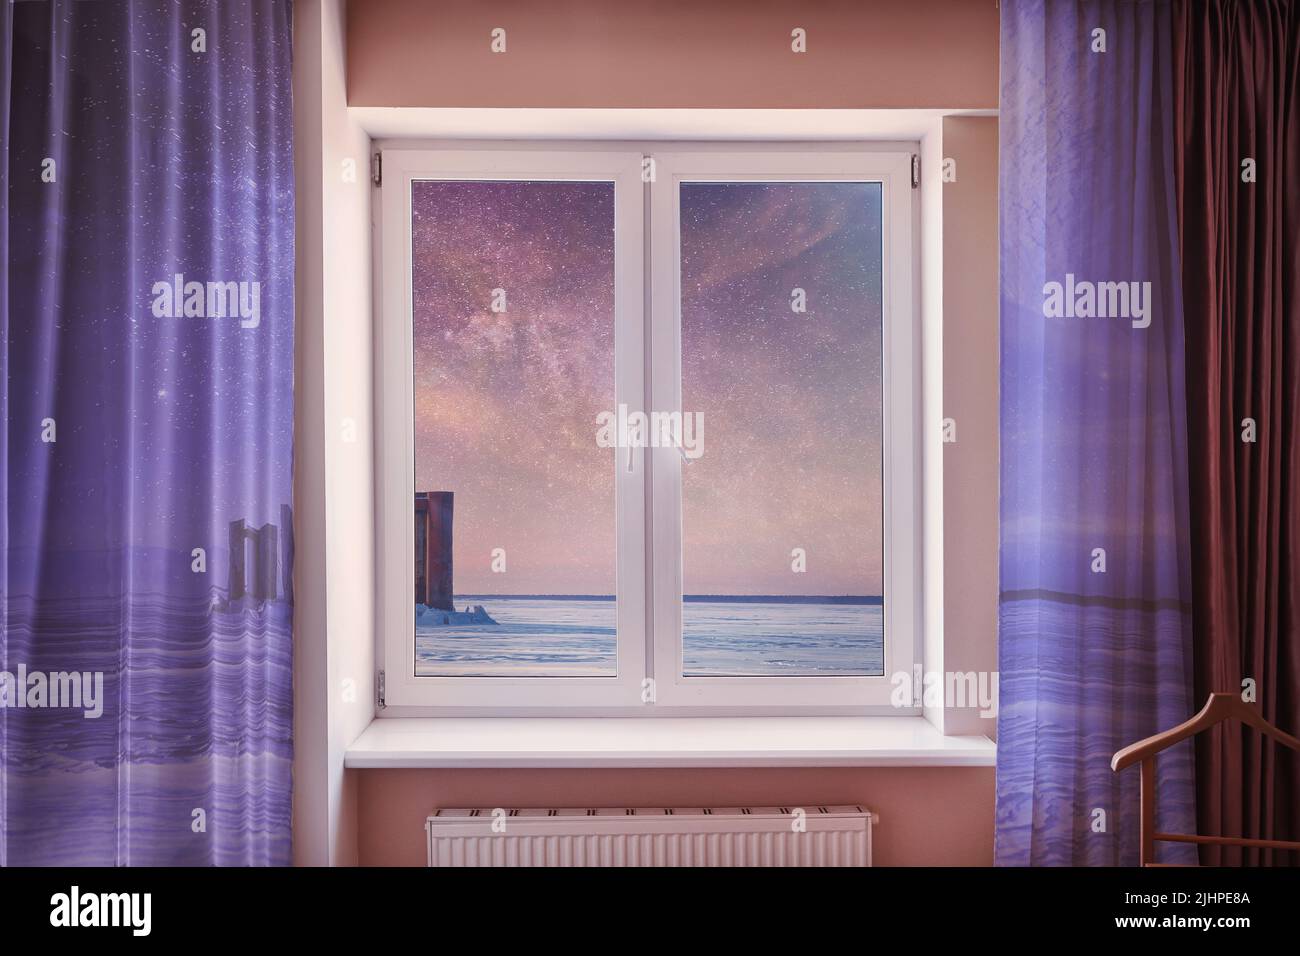 Surreal window in the living room with a fantastic space landscape in the window and on the curtains. Fantasy, imagination, future and dreams theme Stock Photo